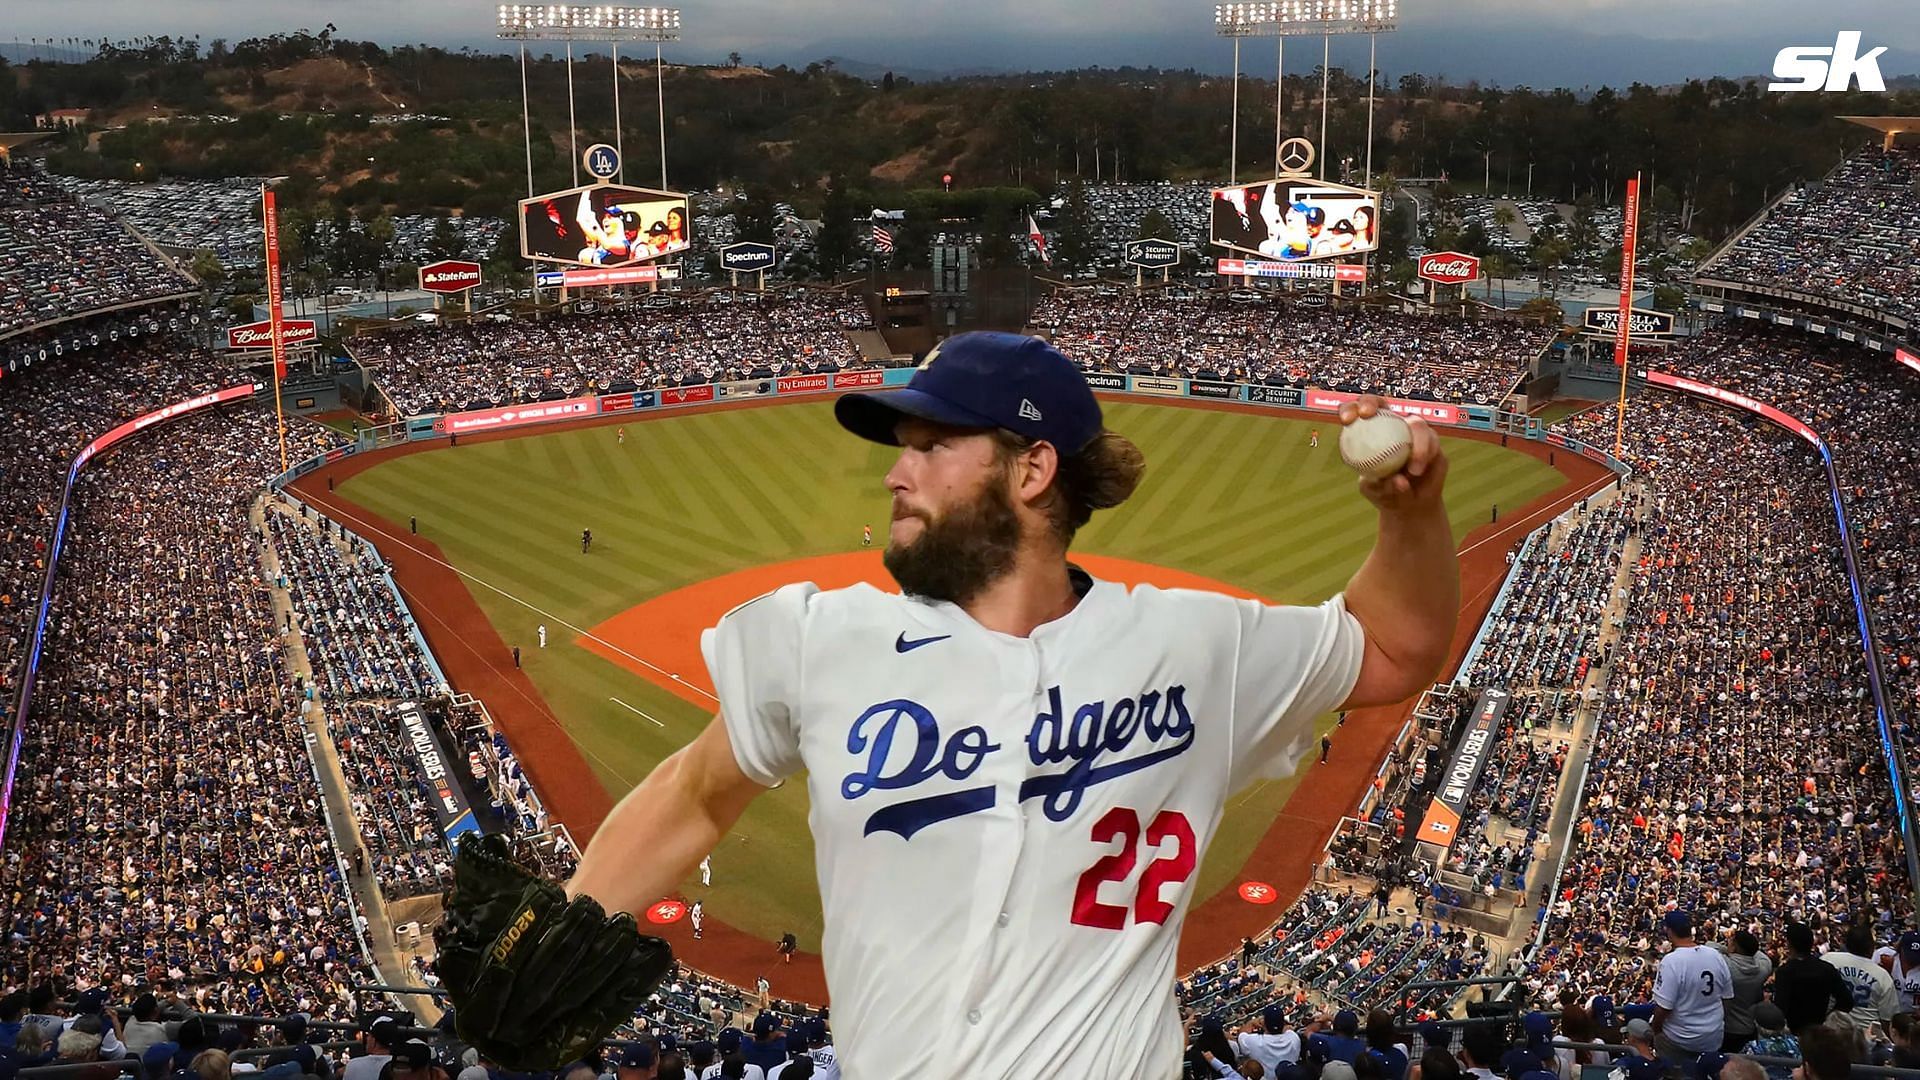 Clayton Kershaw Breaks MLB Record With Most Strikeouts In